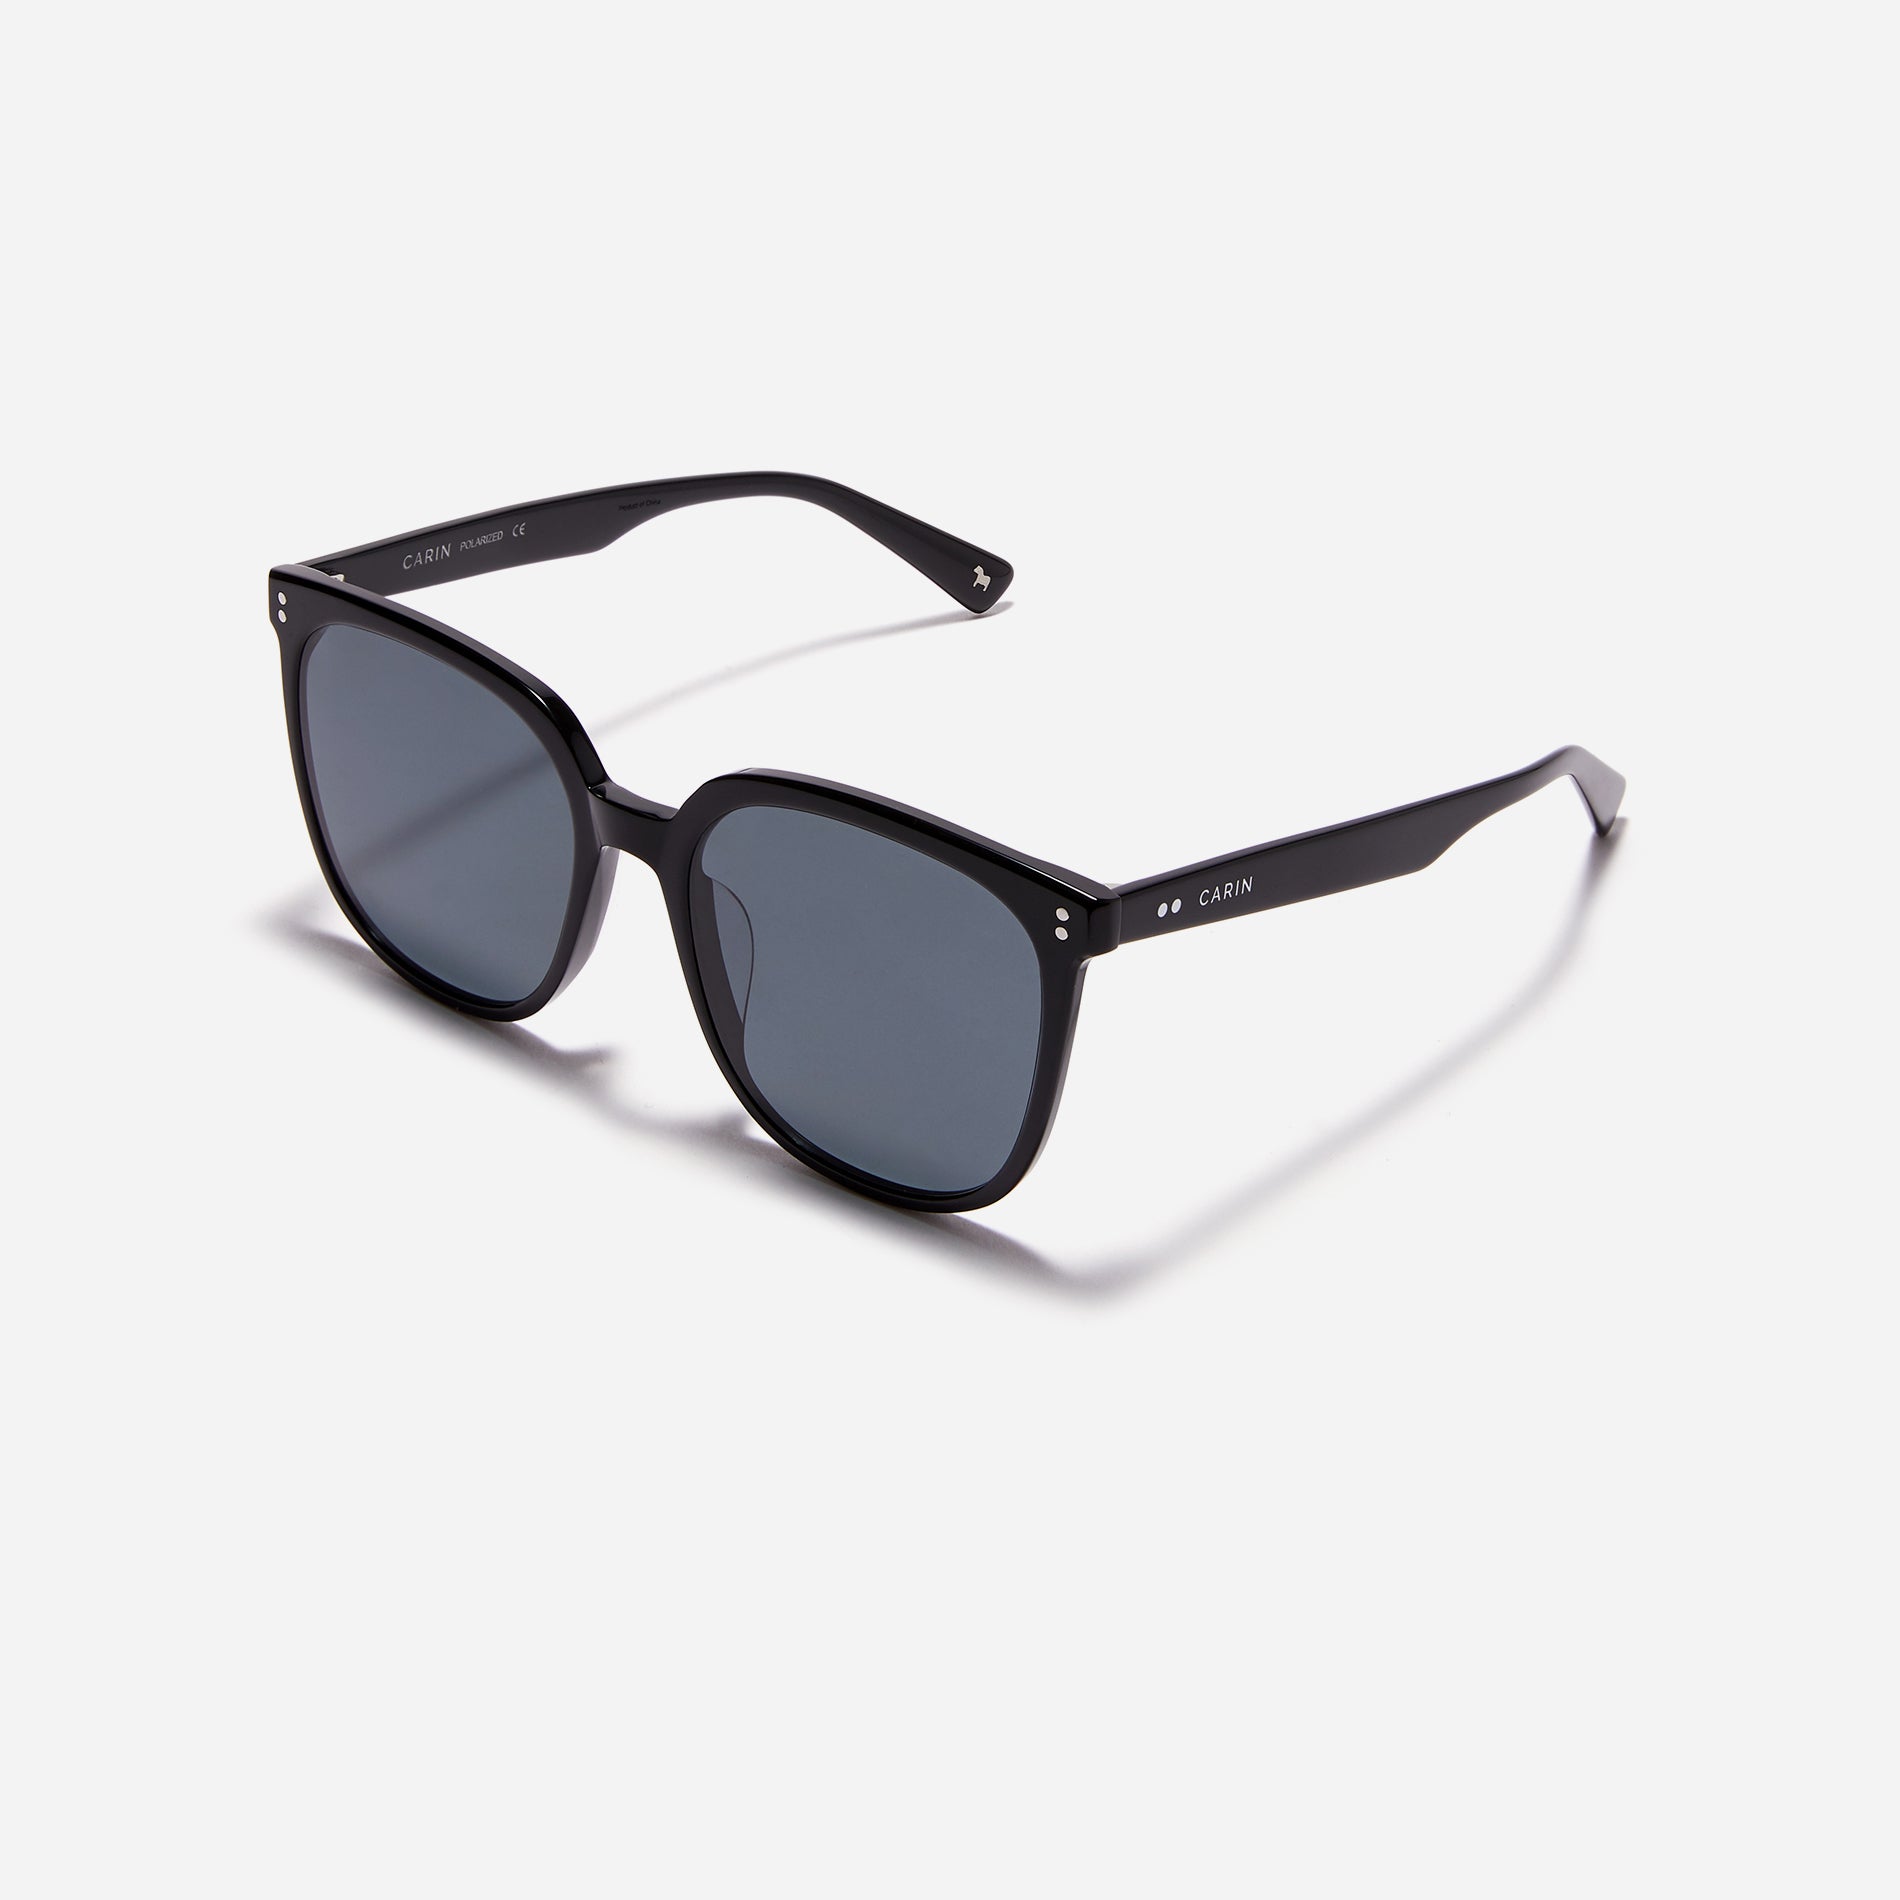 Square-shaped polarized sunglasses, crafted from compressed acetate material for enhanced lightweight properties.